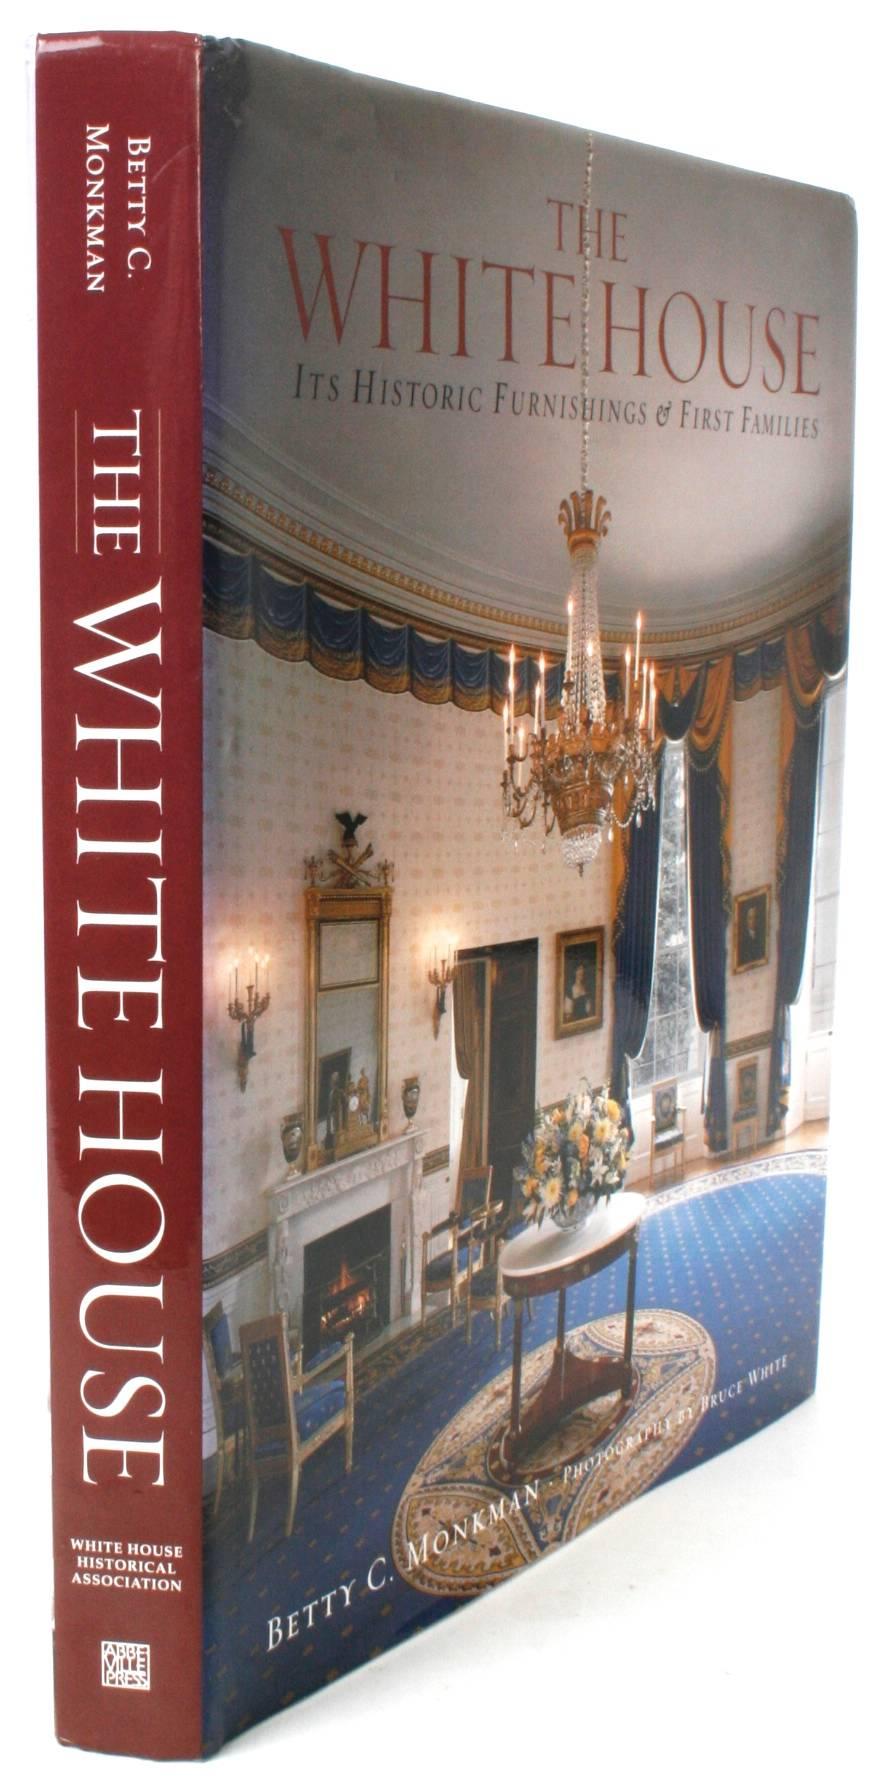 The White House, It's Historic Furnishings & First Families by Betty C. Monkman. New York: Abbeville Press, 2000. Stated first edition hardcover with dust jacket. 320 pp. A beautiful coffee table book about The White House. It showcases the historic